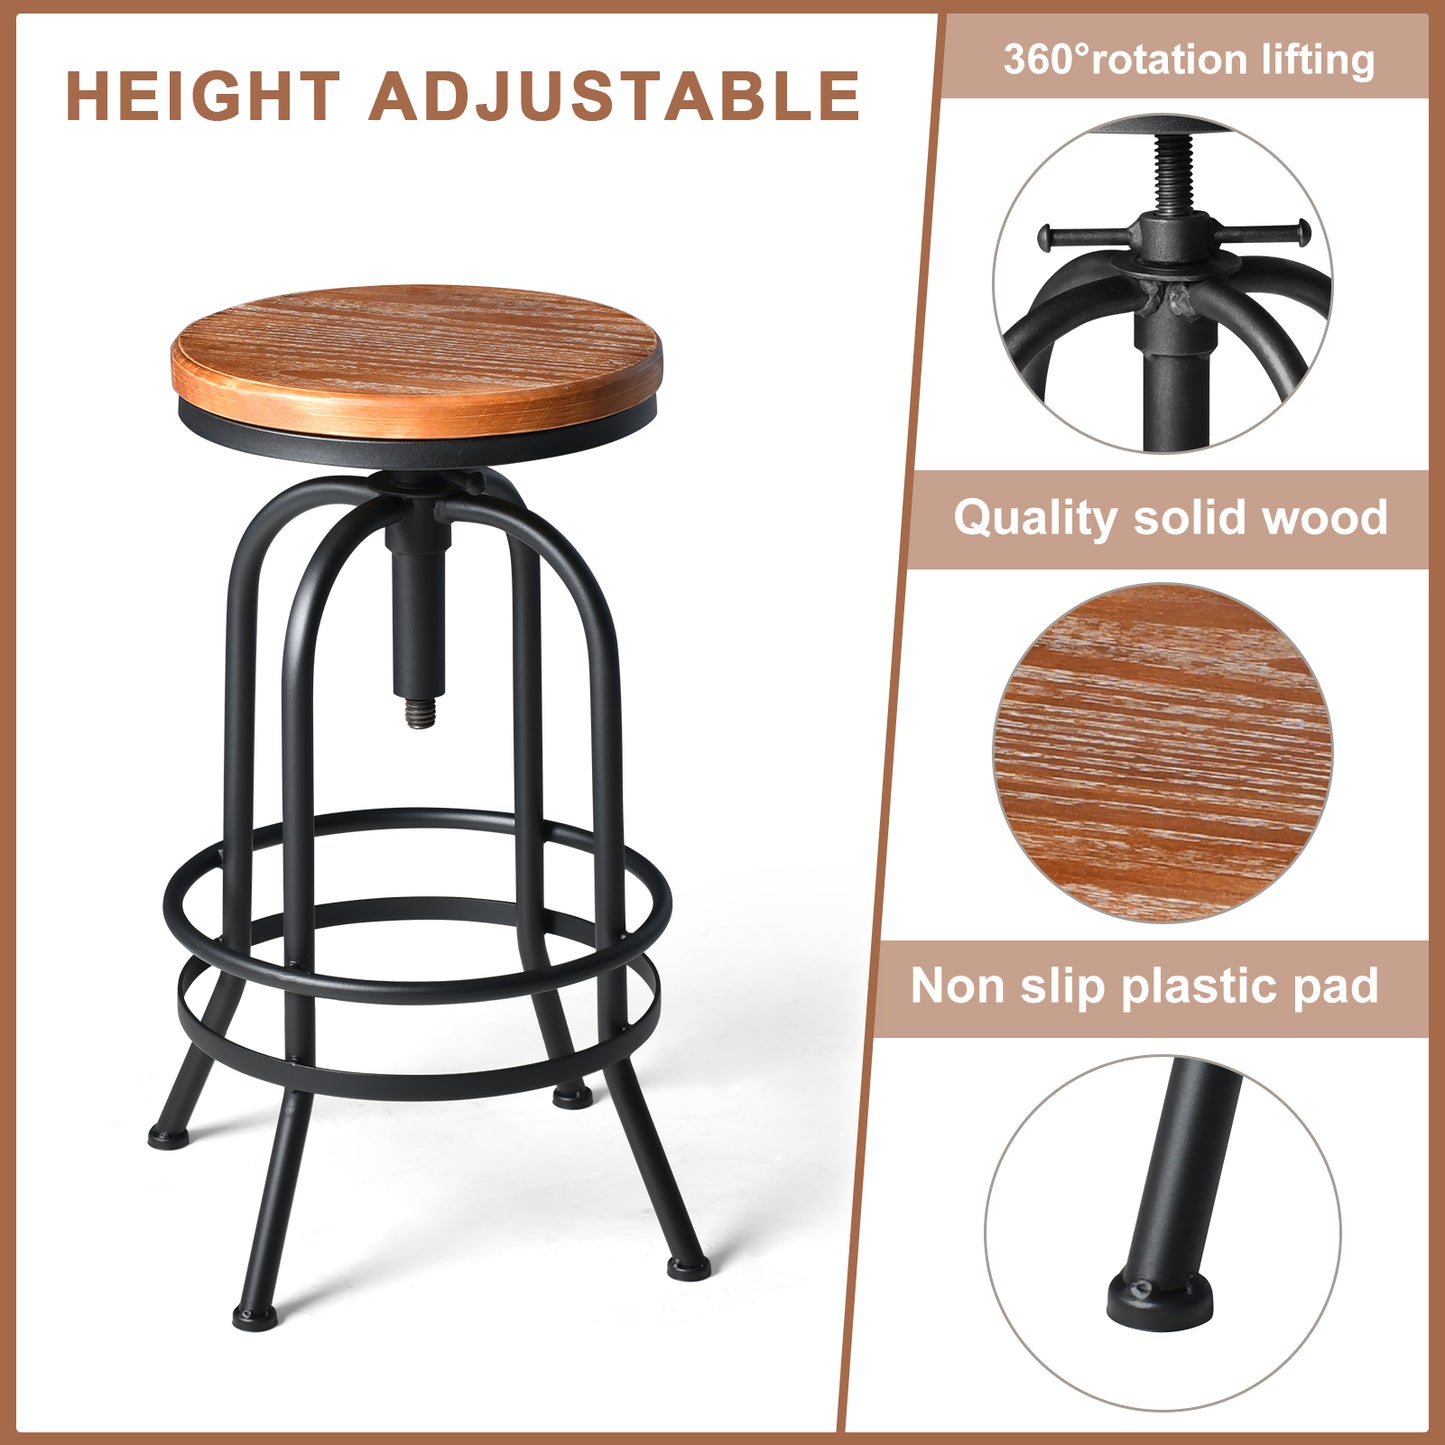 SET OF 2,32 inch Vintage Industrial Bar Stool-Metal Wood Swivel Bar Stool-Retro Bar Height Stool-Counter Height Adjustable Kitchen Stools-Set of 2-Extra Tall Pub Height 26-32 Inch,Fully Welded